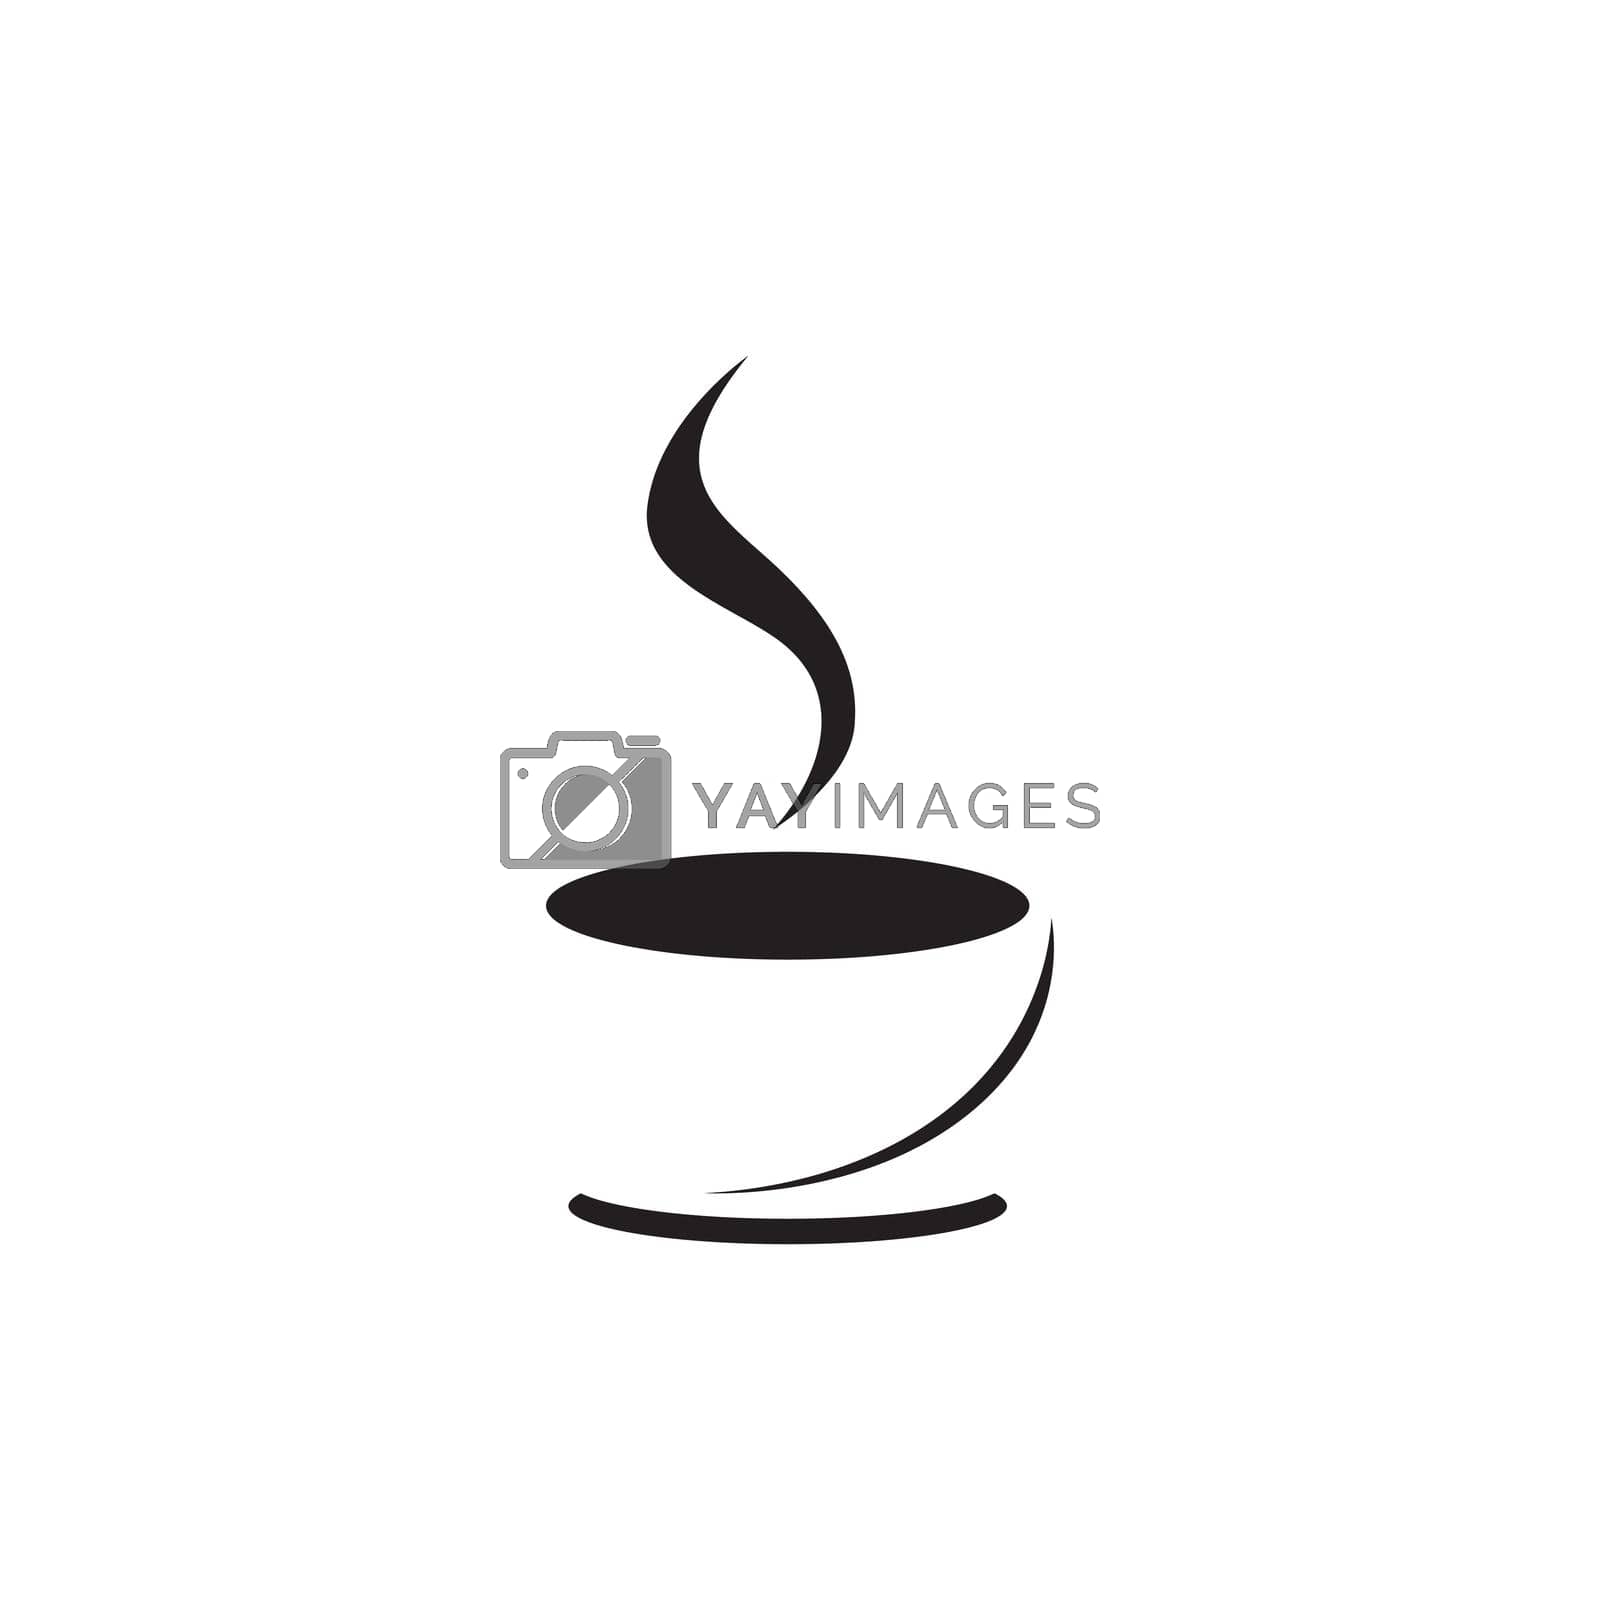 Royalty free image of Coffee cup logo vector by ABD03